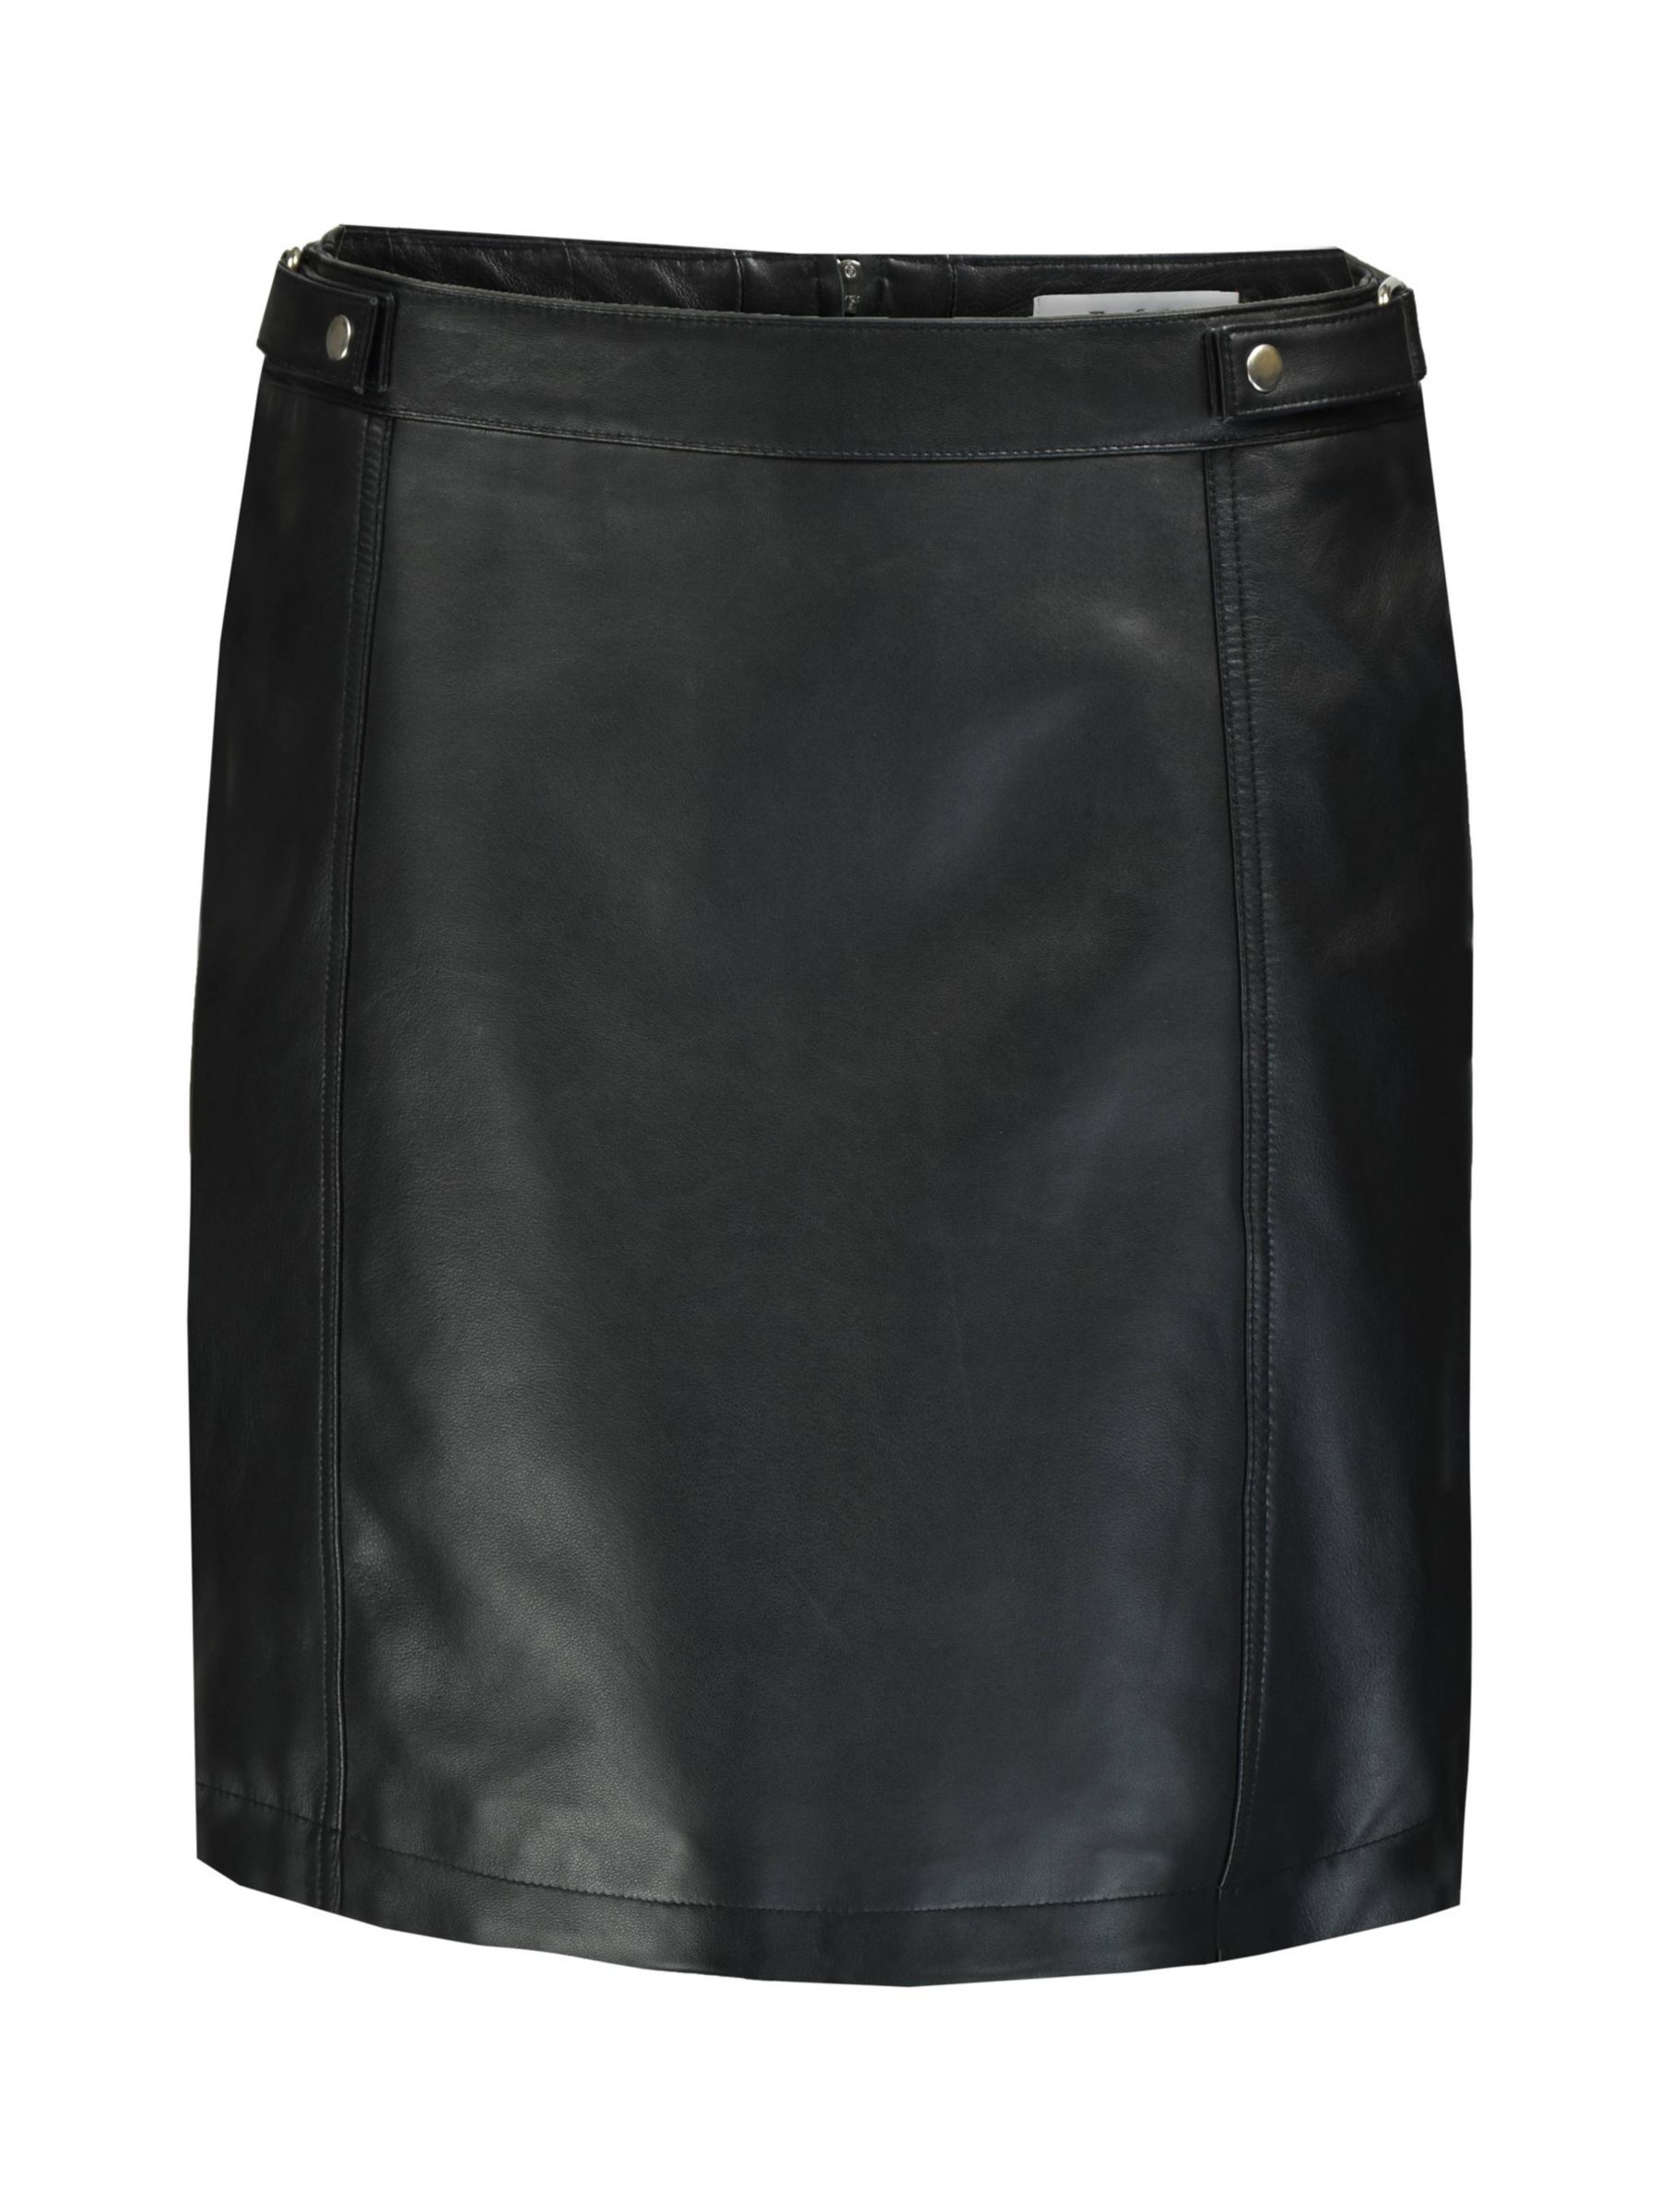 Buy Ro&Zo Leather Buckle Mini Leather Skirt, Black Online at johnlewis.com